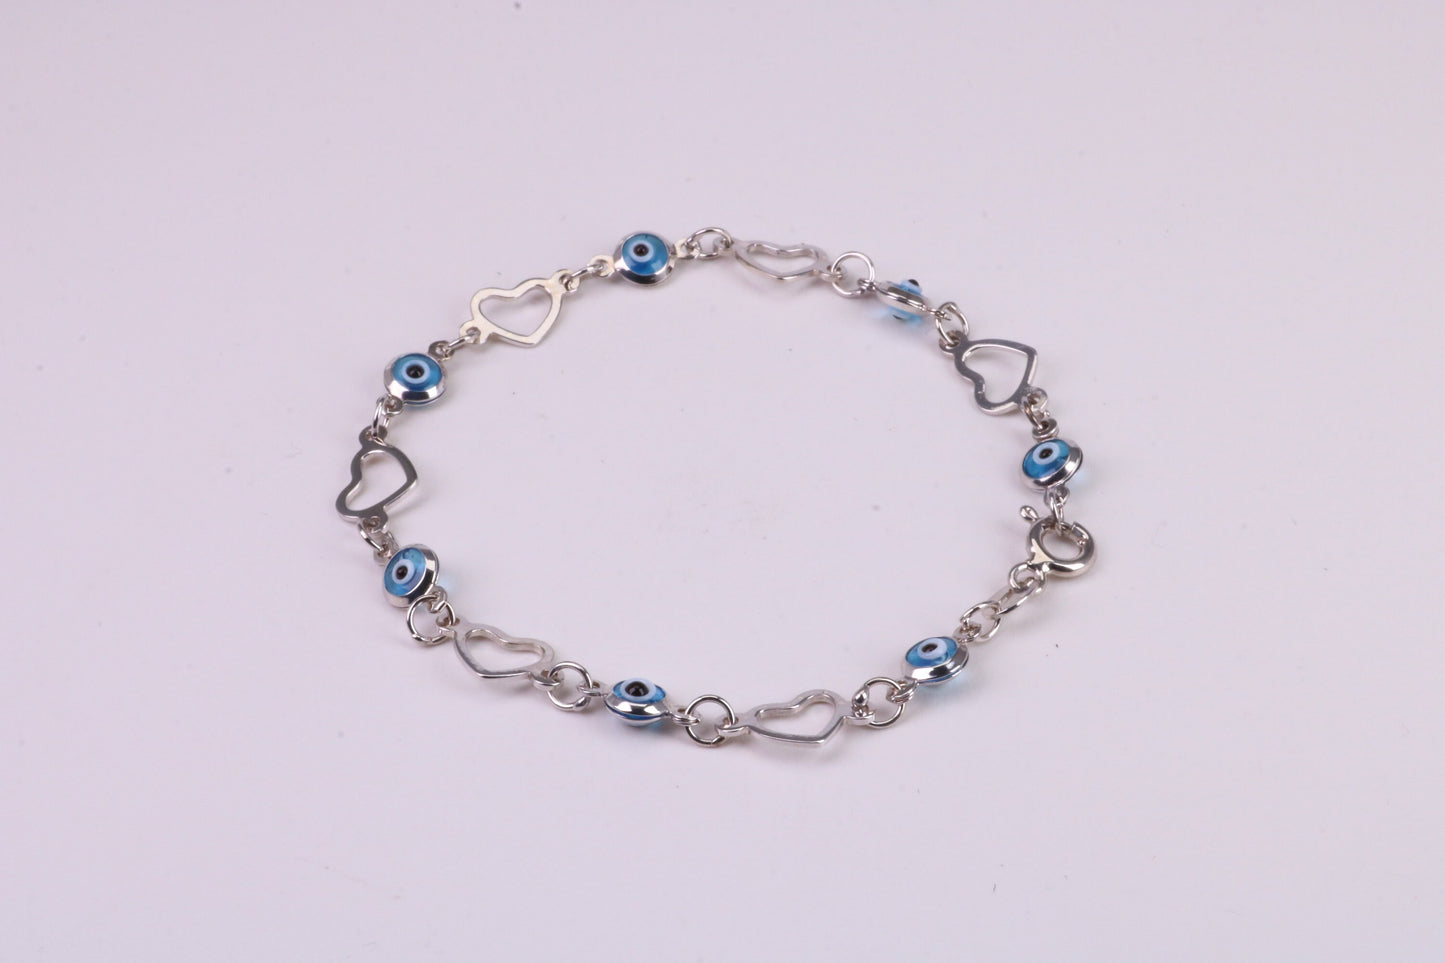 Evil Eye Protector Love Hearts Bracelet, Made from solid Sterling Silver